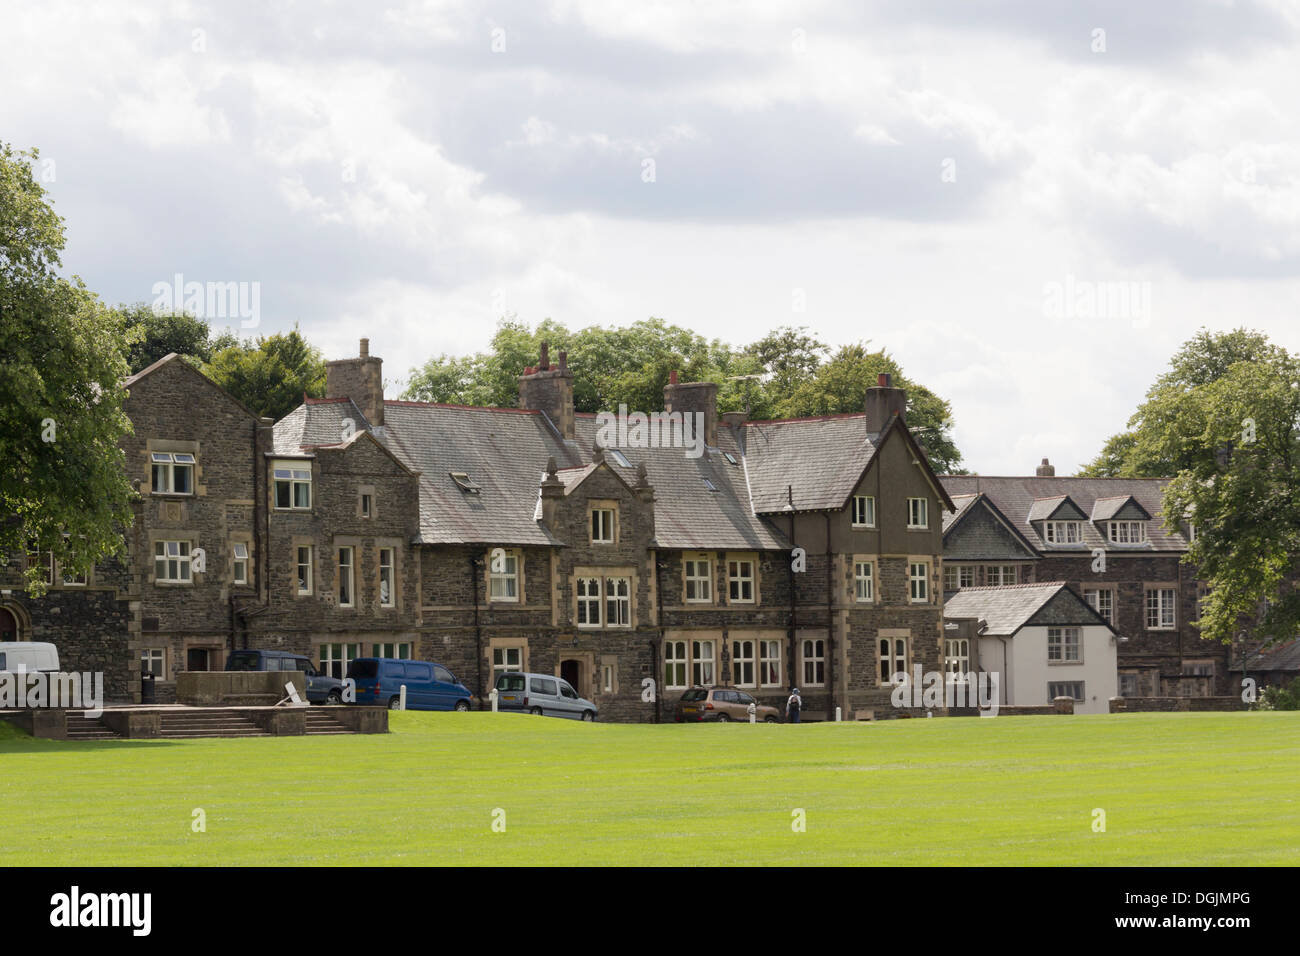 Sedbergh school in Cumbria. Sedbergh school is a co-educational boarding school with strong sporting traditions. Stock Photo